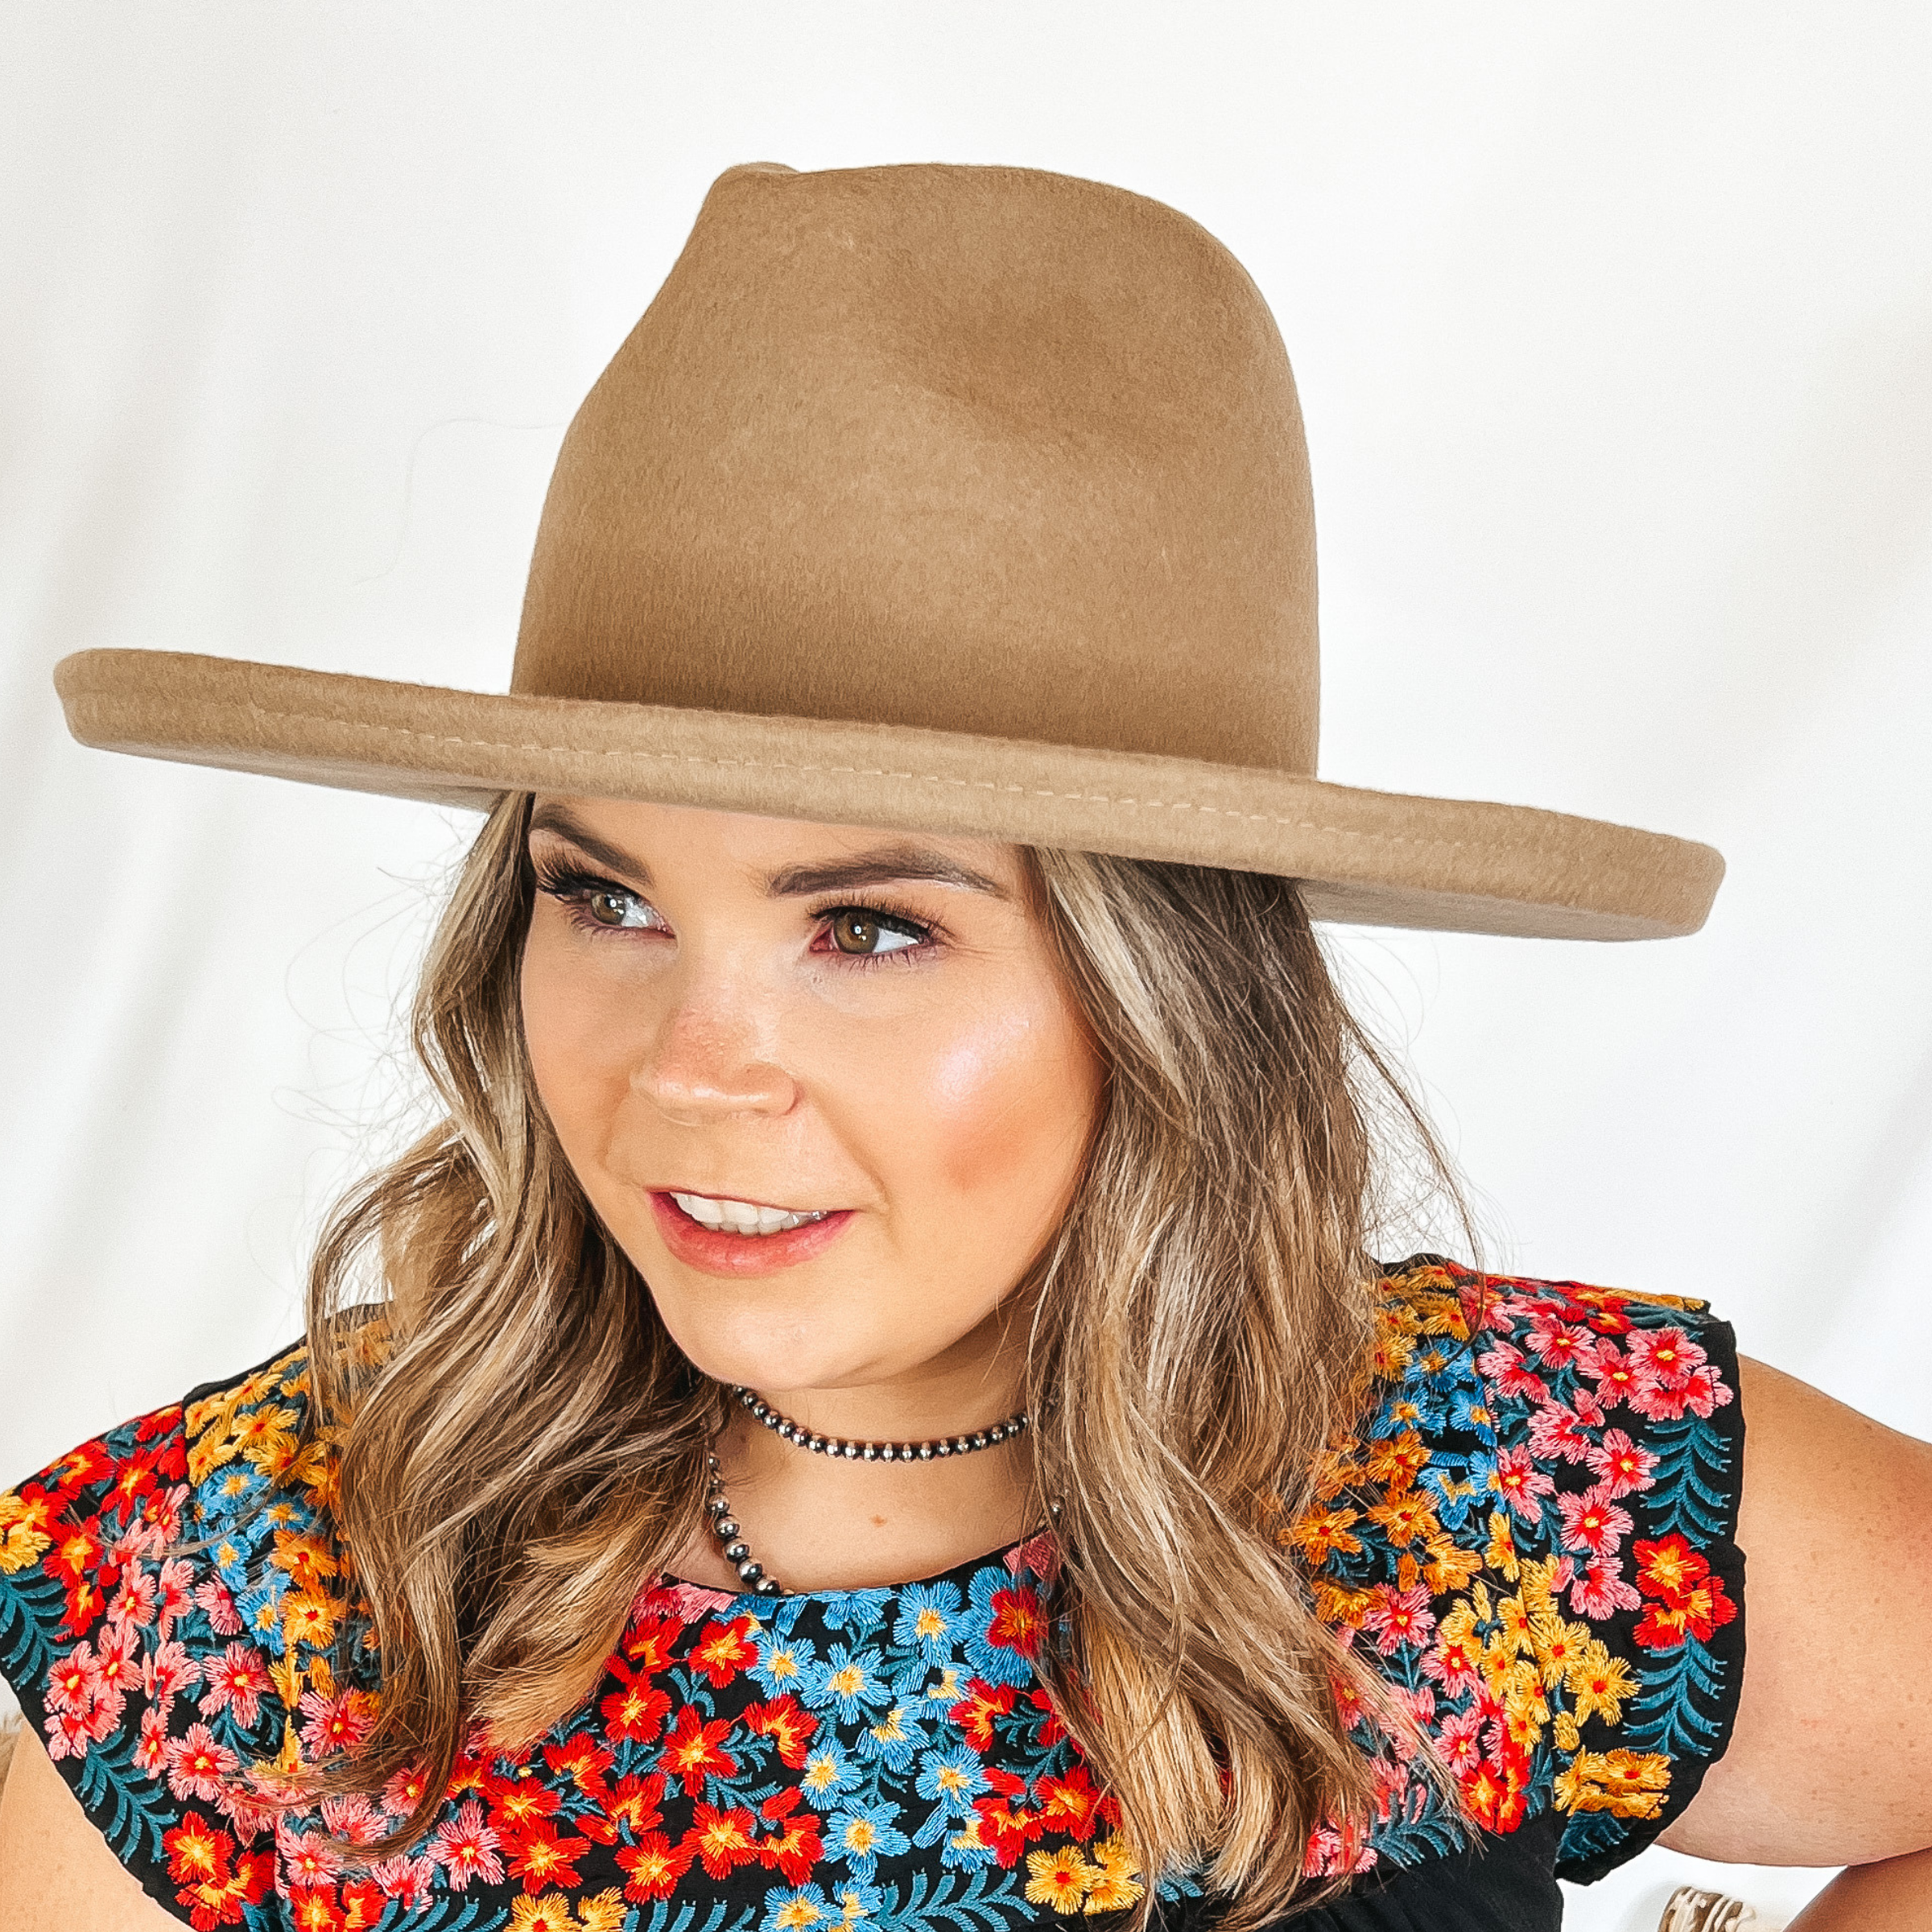 Model is wearing an tan rancher hat with a flat brim with rolled edges.